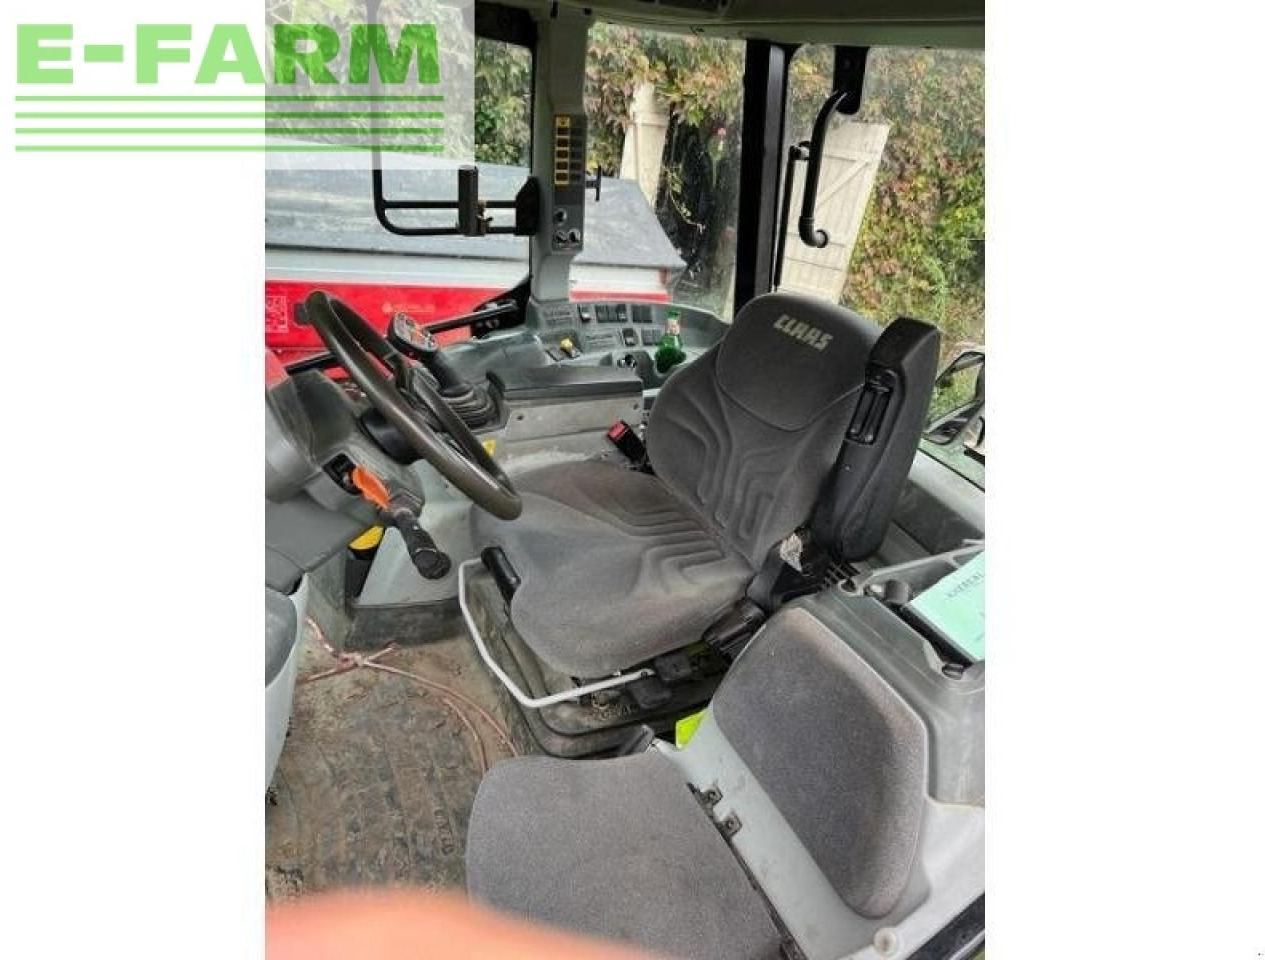 Tractor CLAAS arion 430